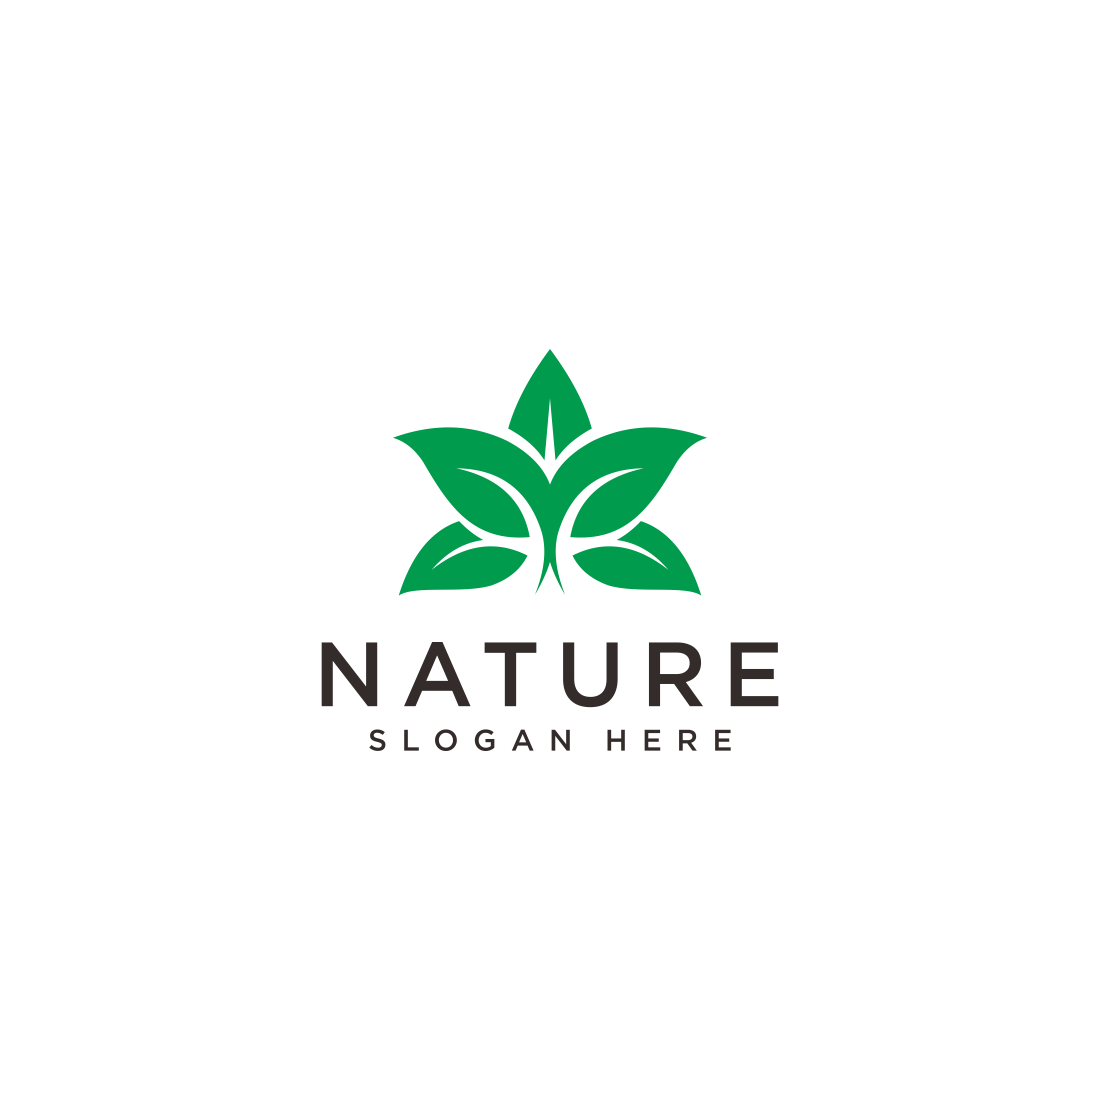 leaf nature vector design template cover image.